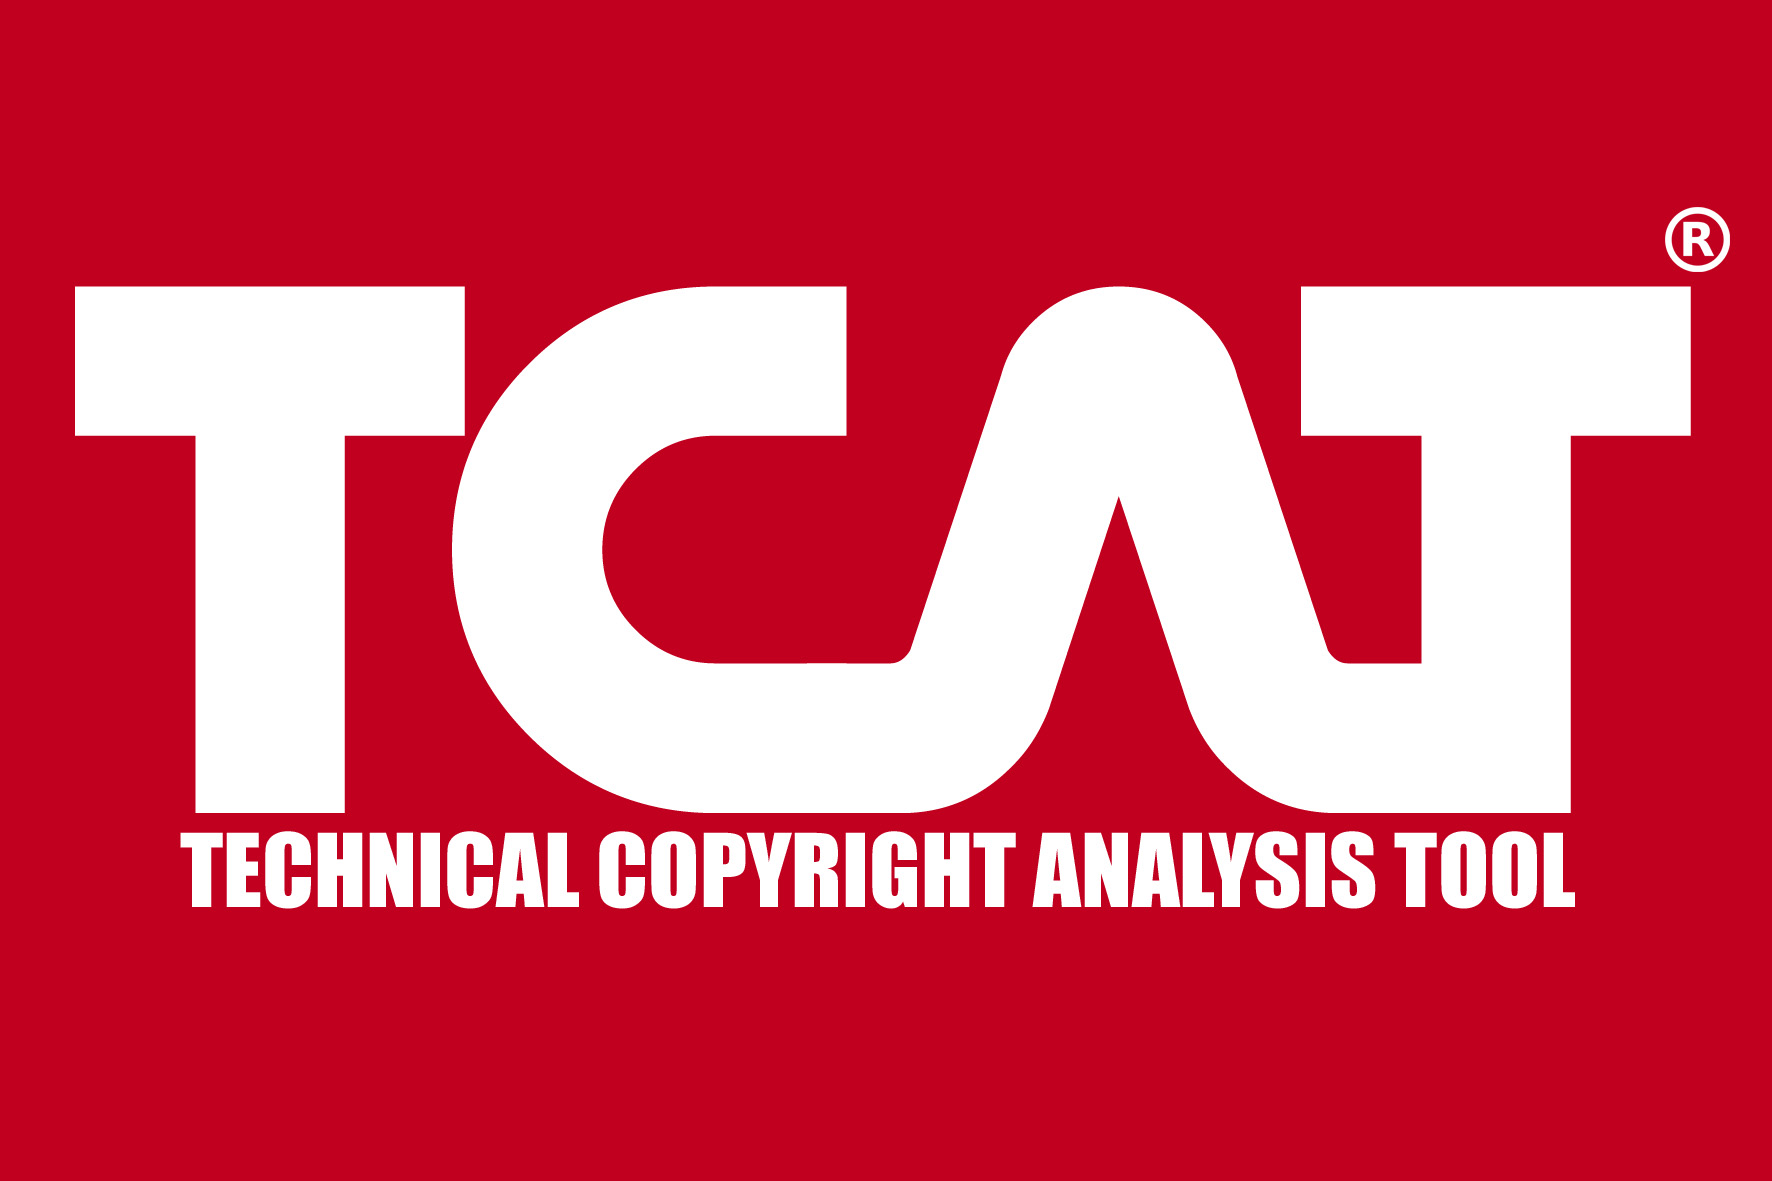 Formation of TCAT Limited Subsidiary